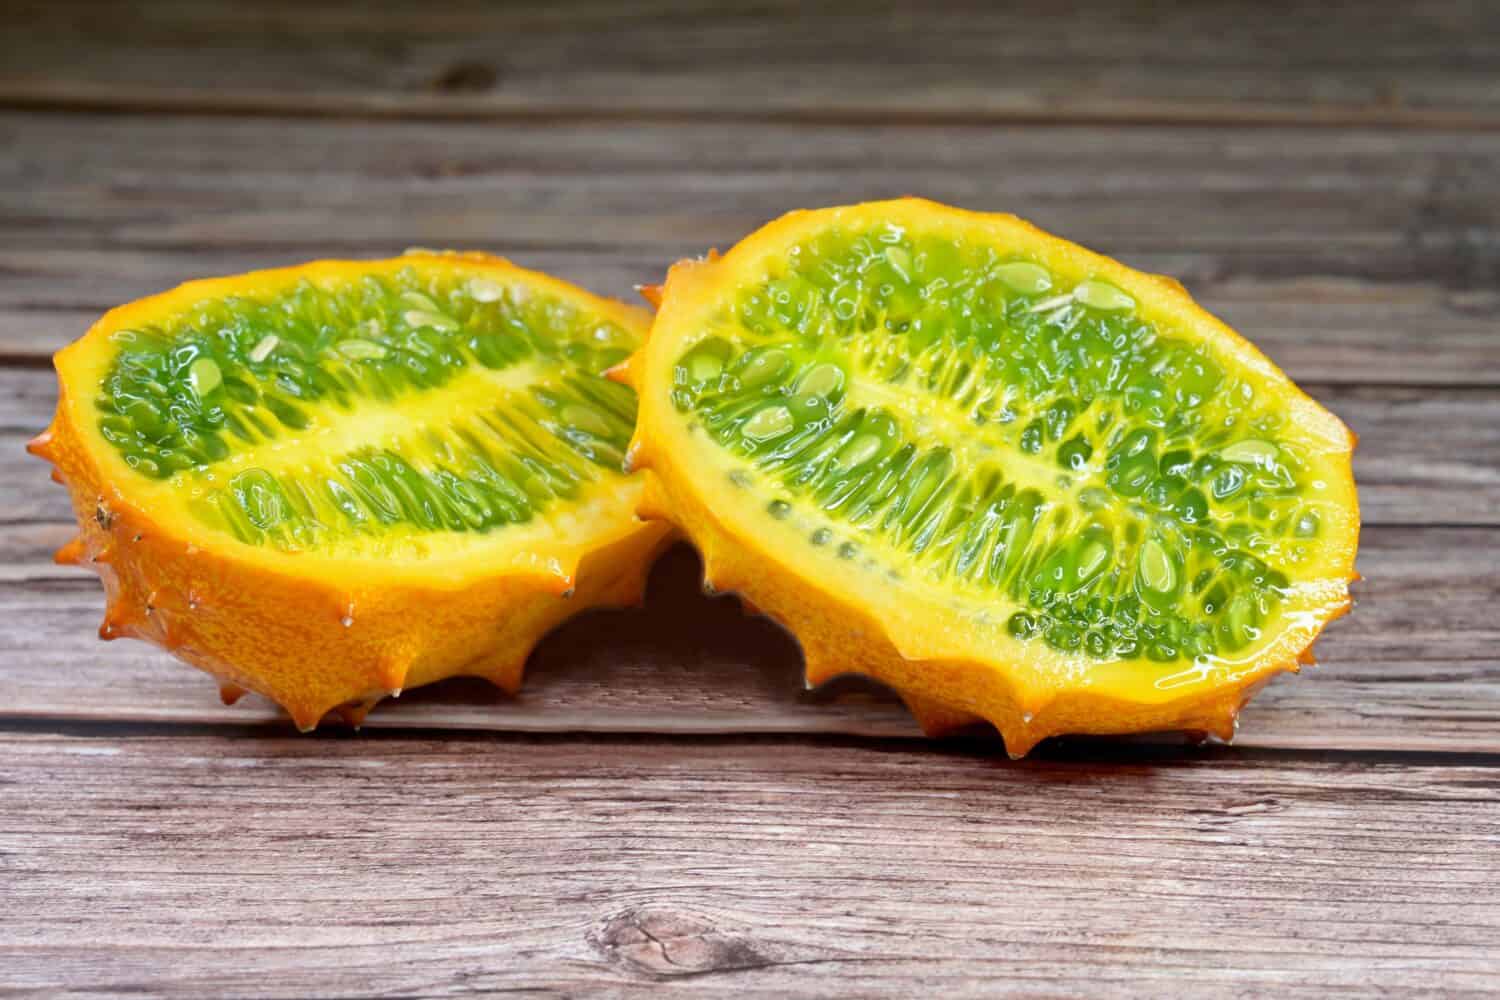 Kiwano, Cucumis metuliferus, commonly called the African horned melon or cucumber, is an annual vine in the cucumber and melon family, Cucurbitaceae 